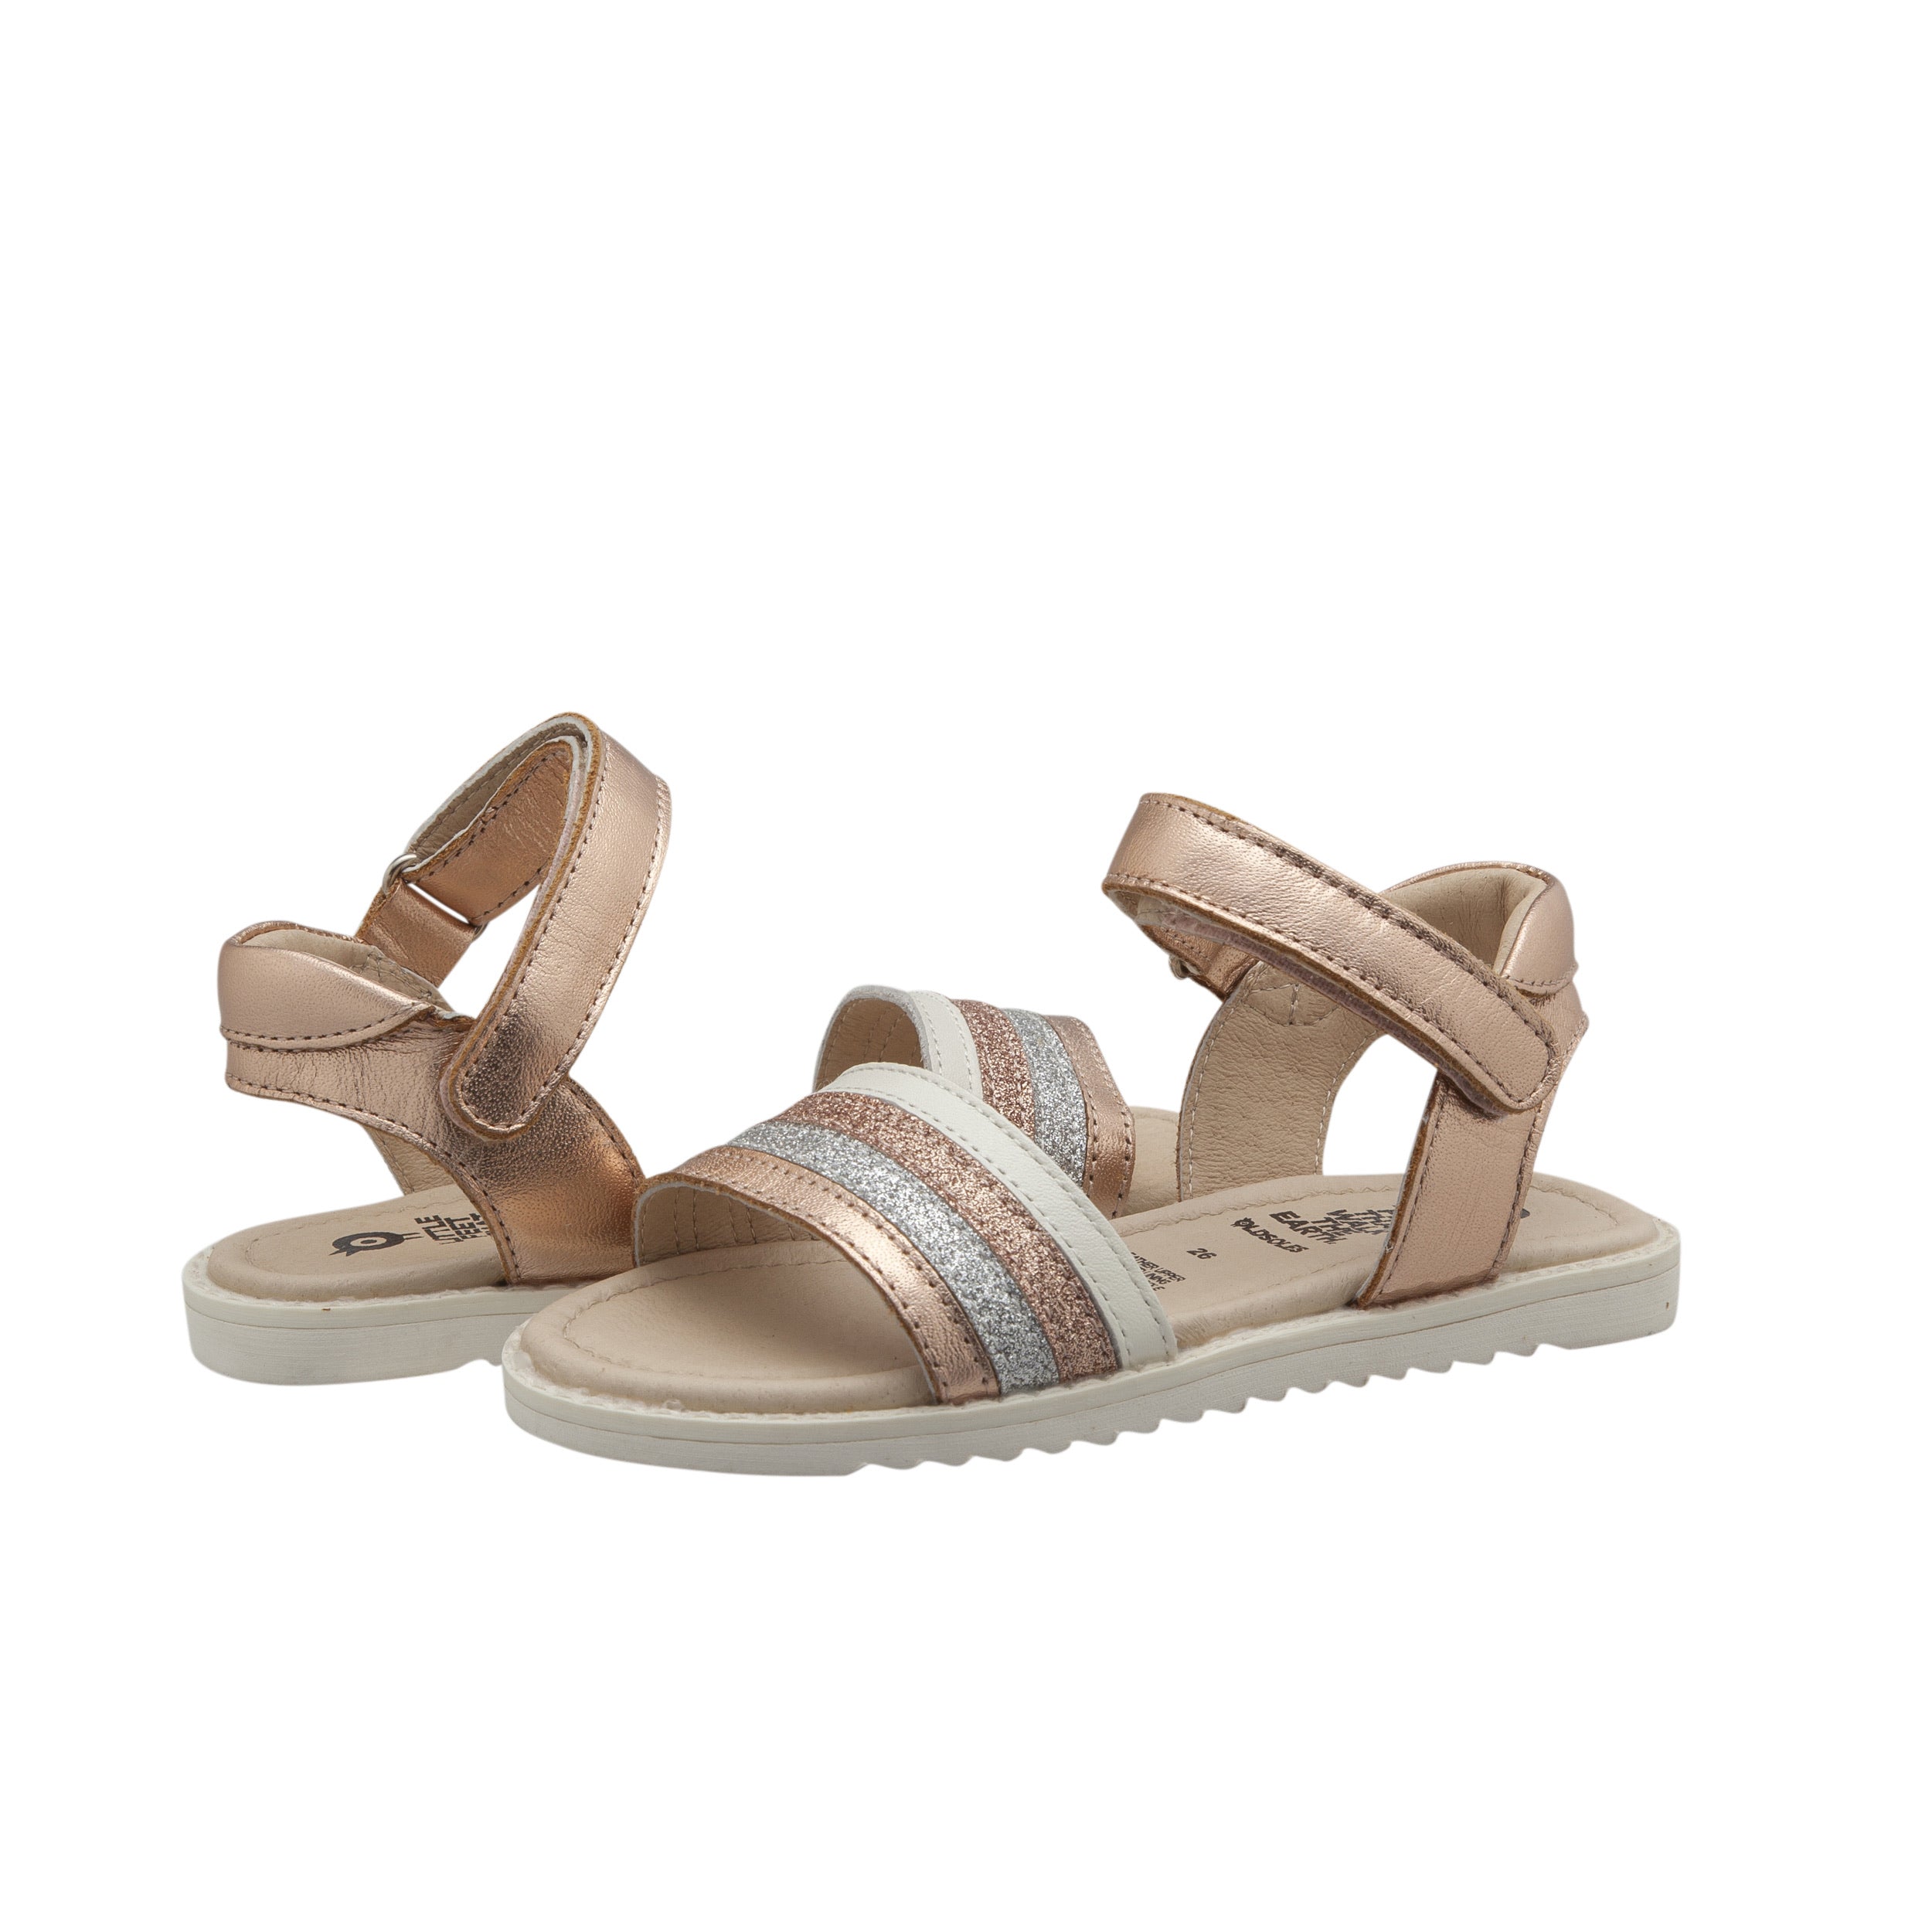 Colour Pop Sandal- Rosegold. Old Sole shoes for girls. Shop in store or online at Sticky Fingers Childrens Boutique, Niddrie, Melbourne. 